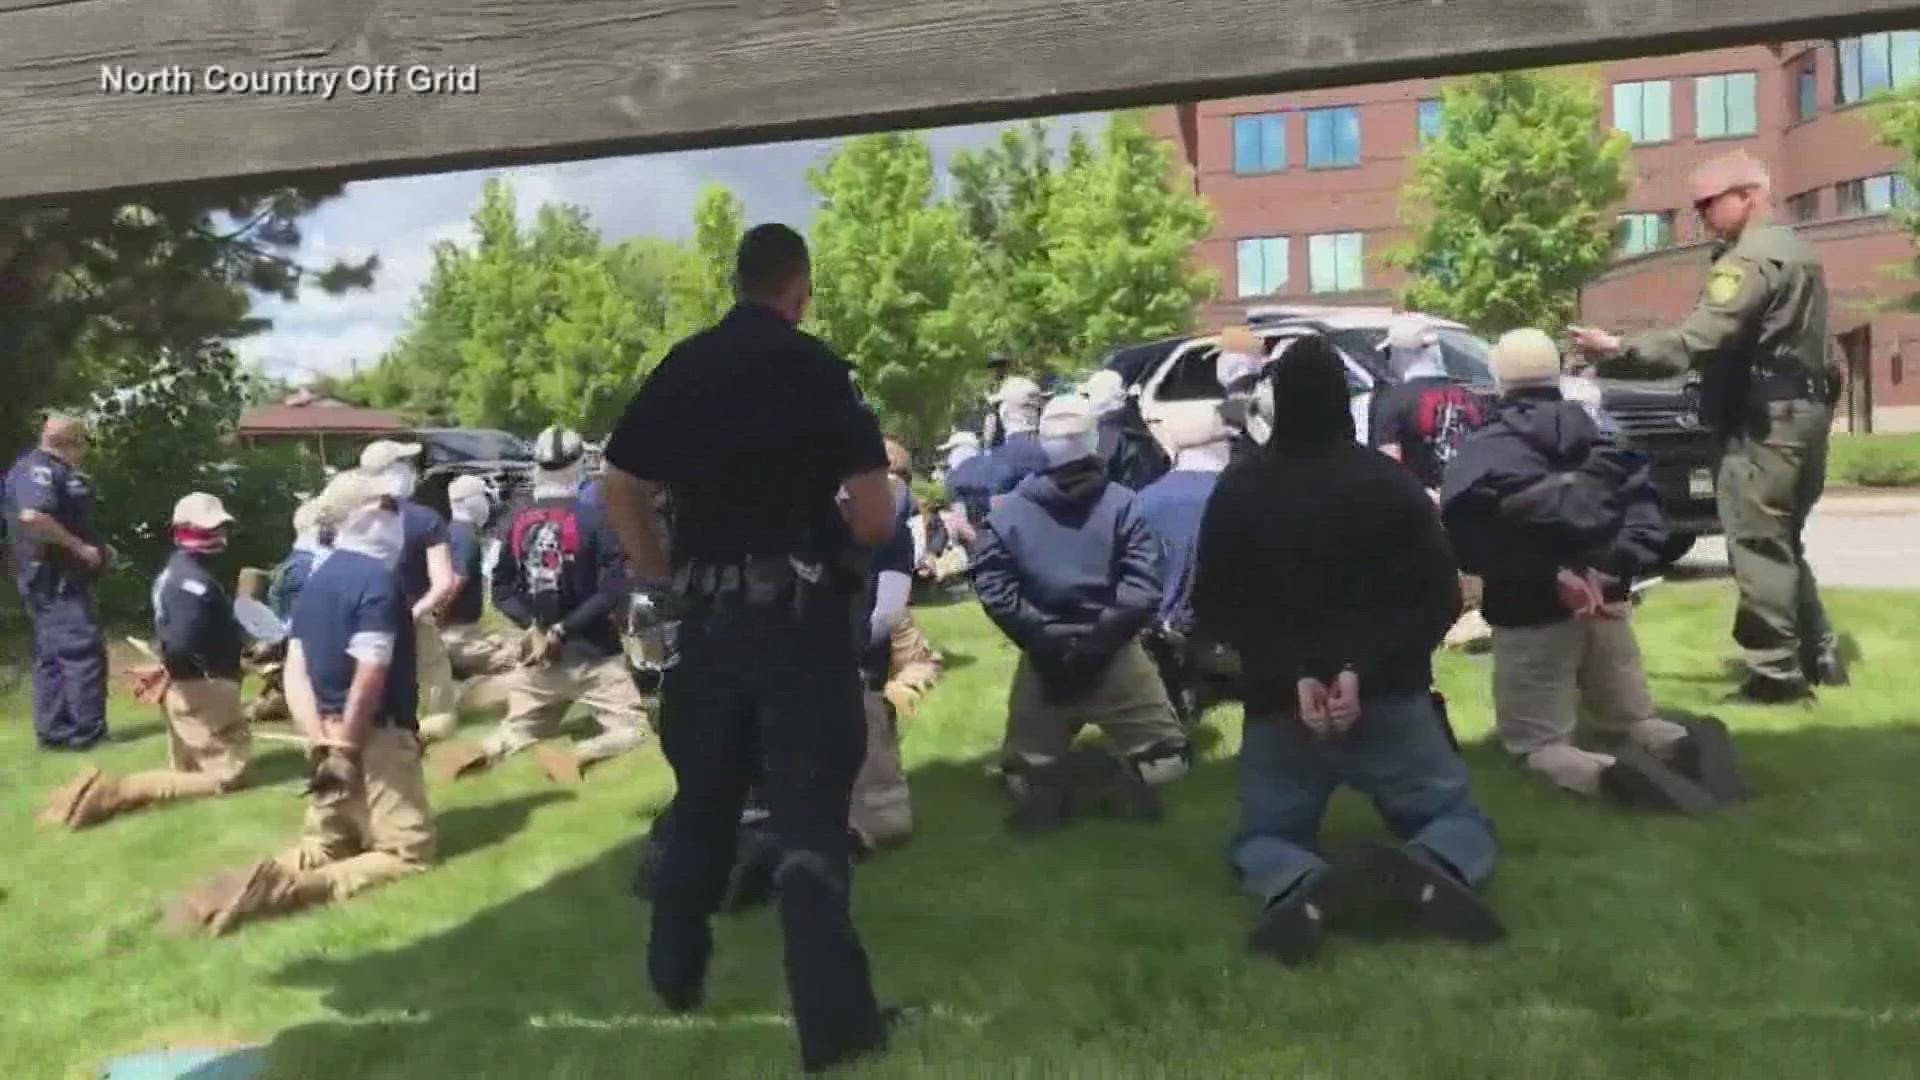 Thirty-one Patriot Front members were found packed in a U-Haul truck near an Idaho pride event on Saturday, and police believe they were going to riot.